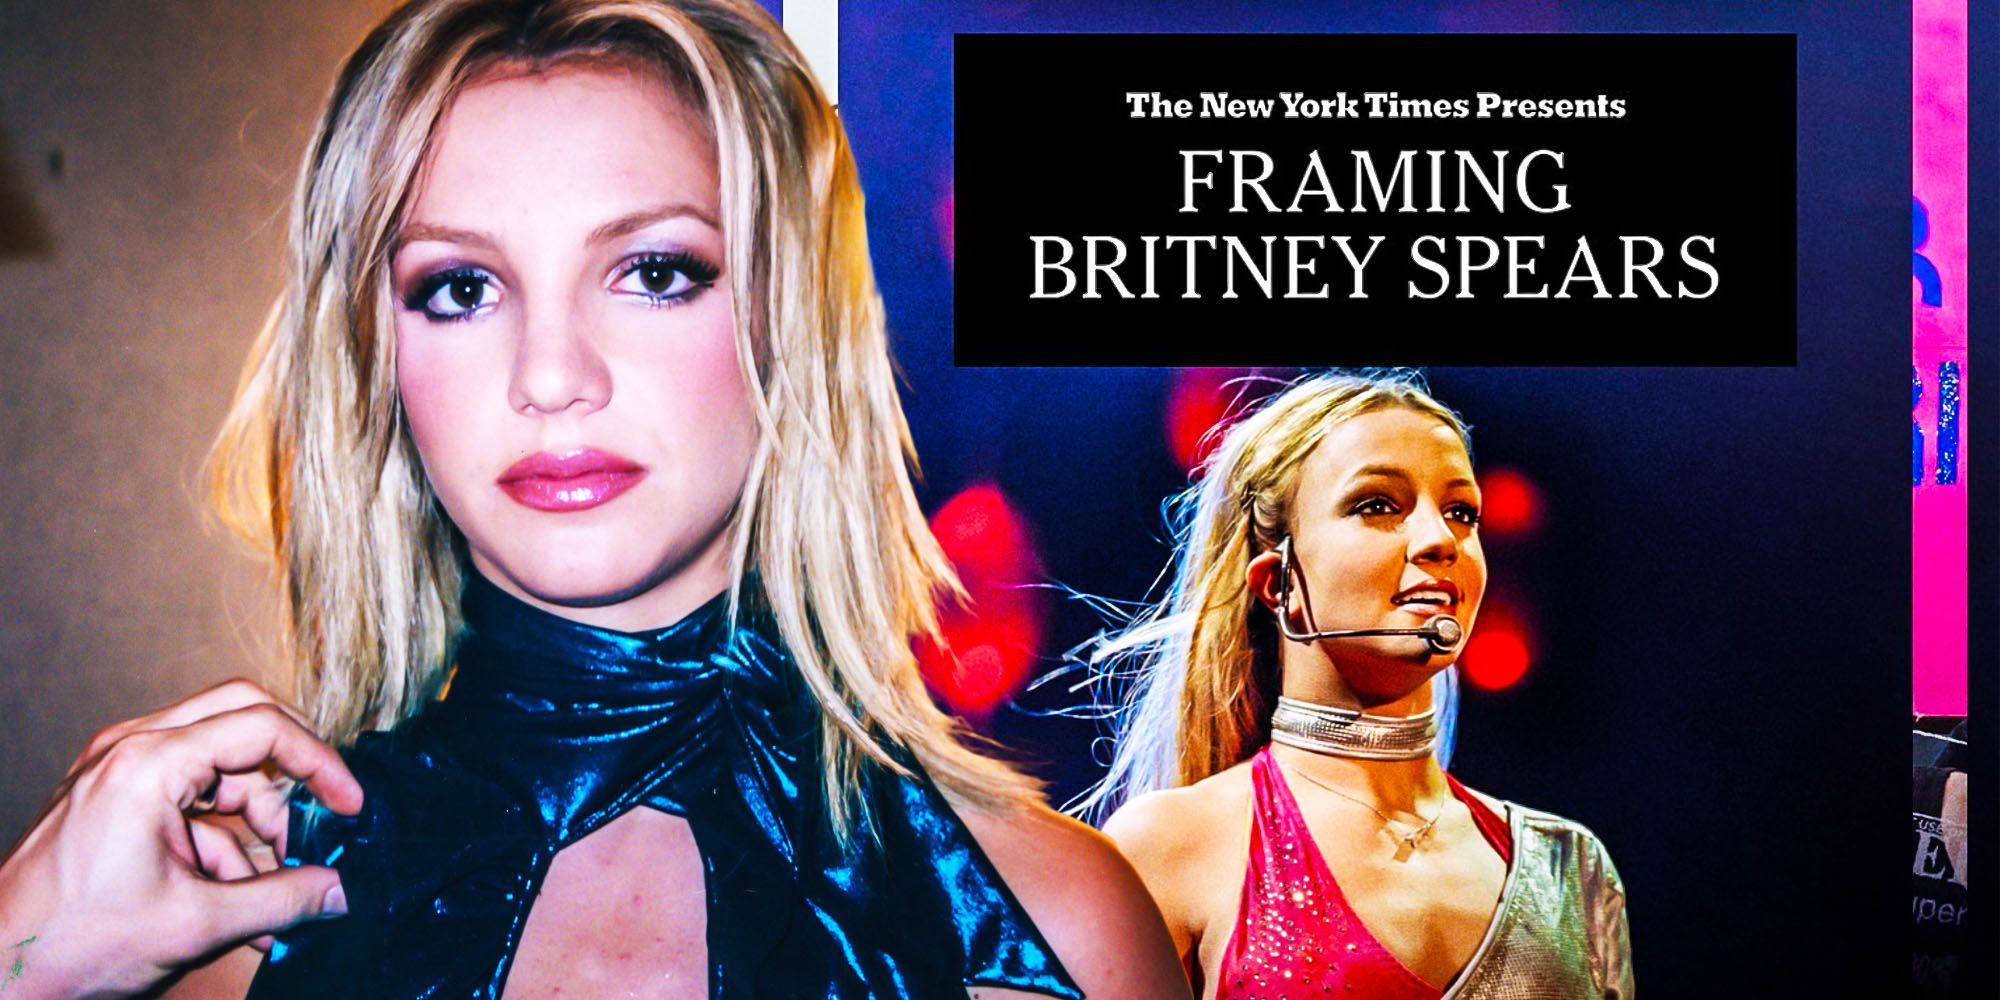 Framing Britney: Every Update In Britney Spears' Fight Since Release